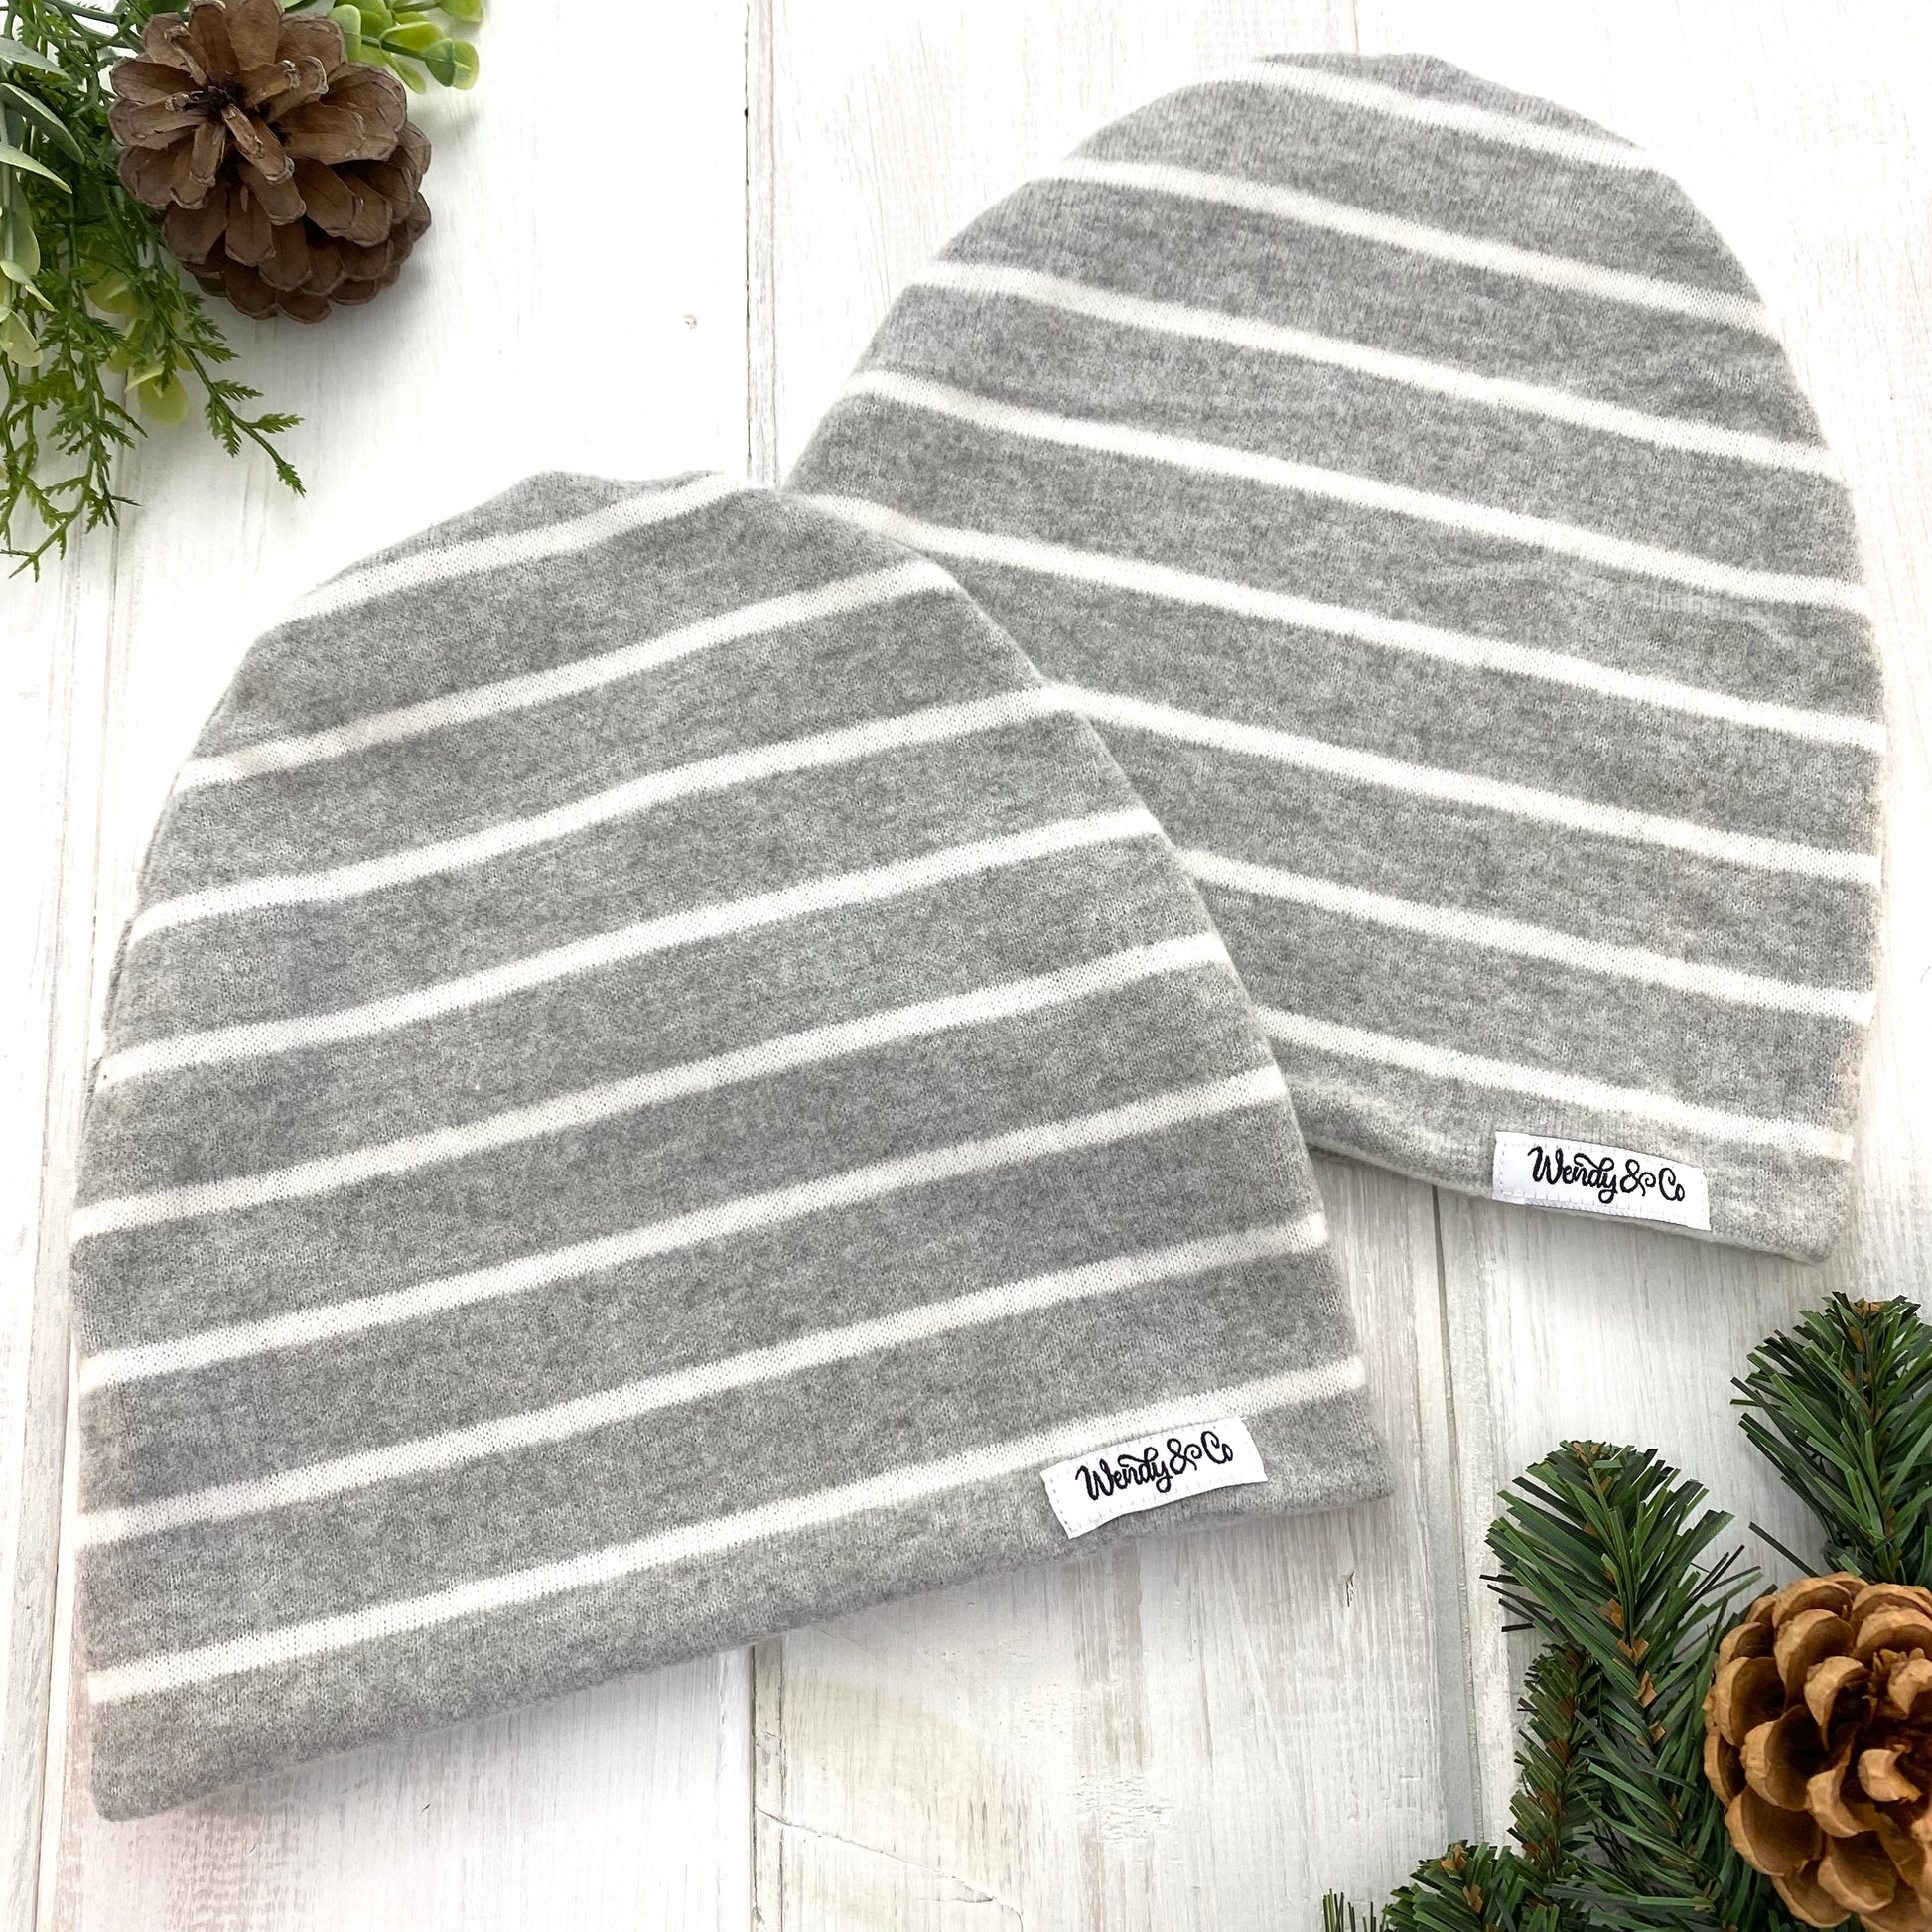 Gray and white beanie for winter.